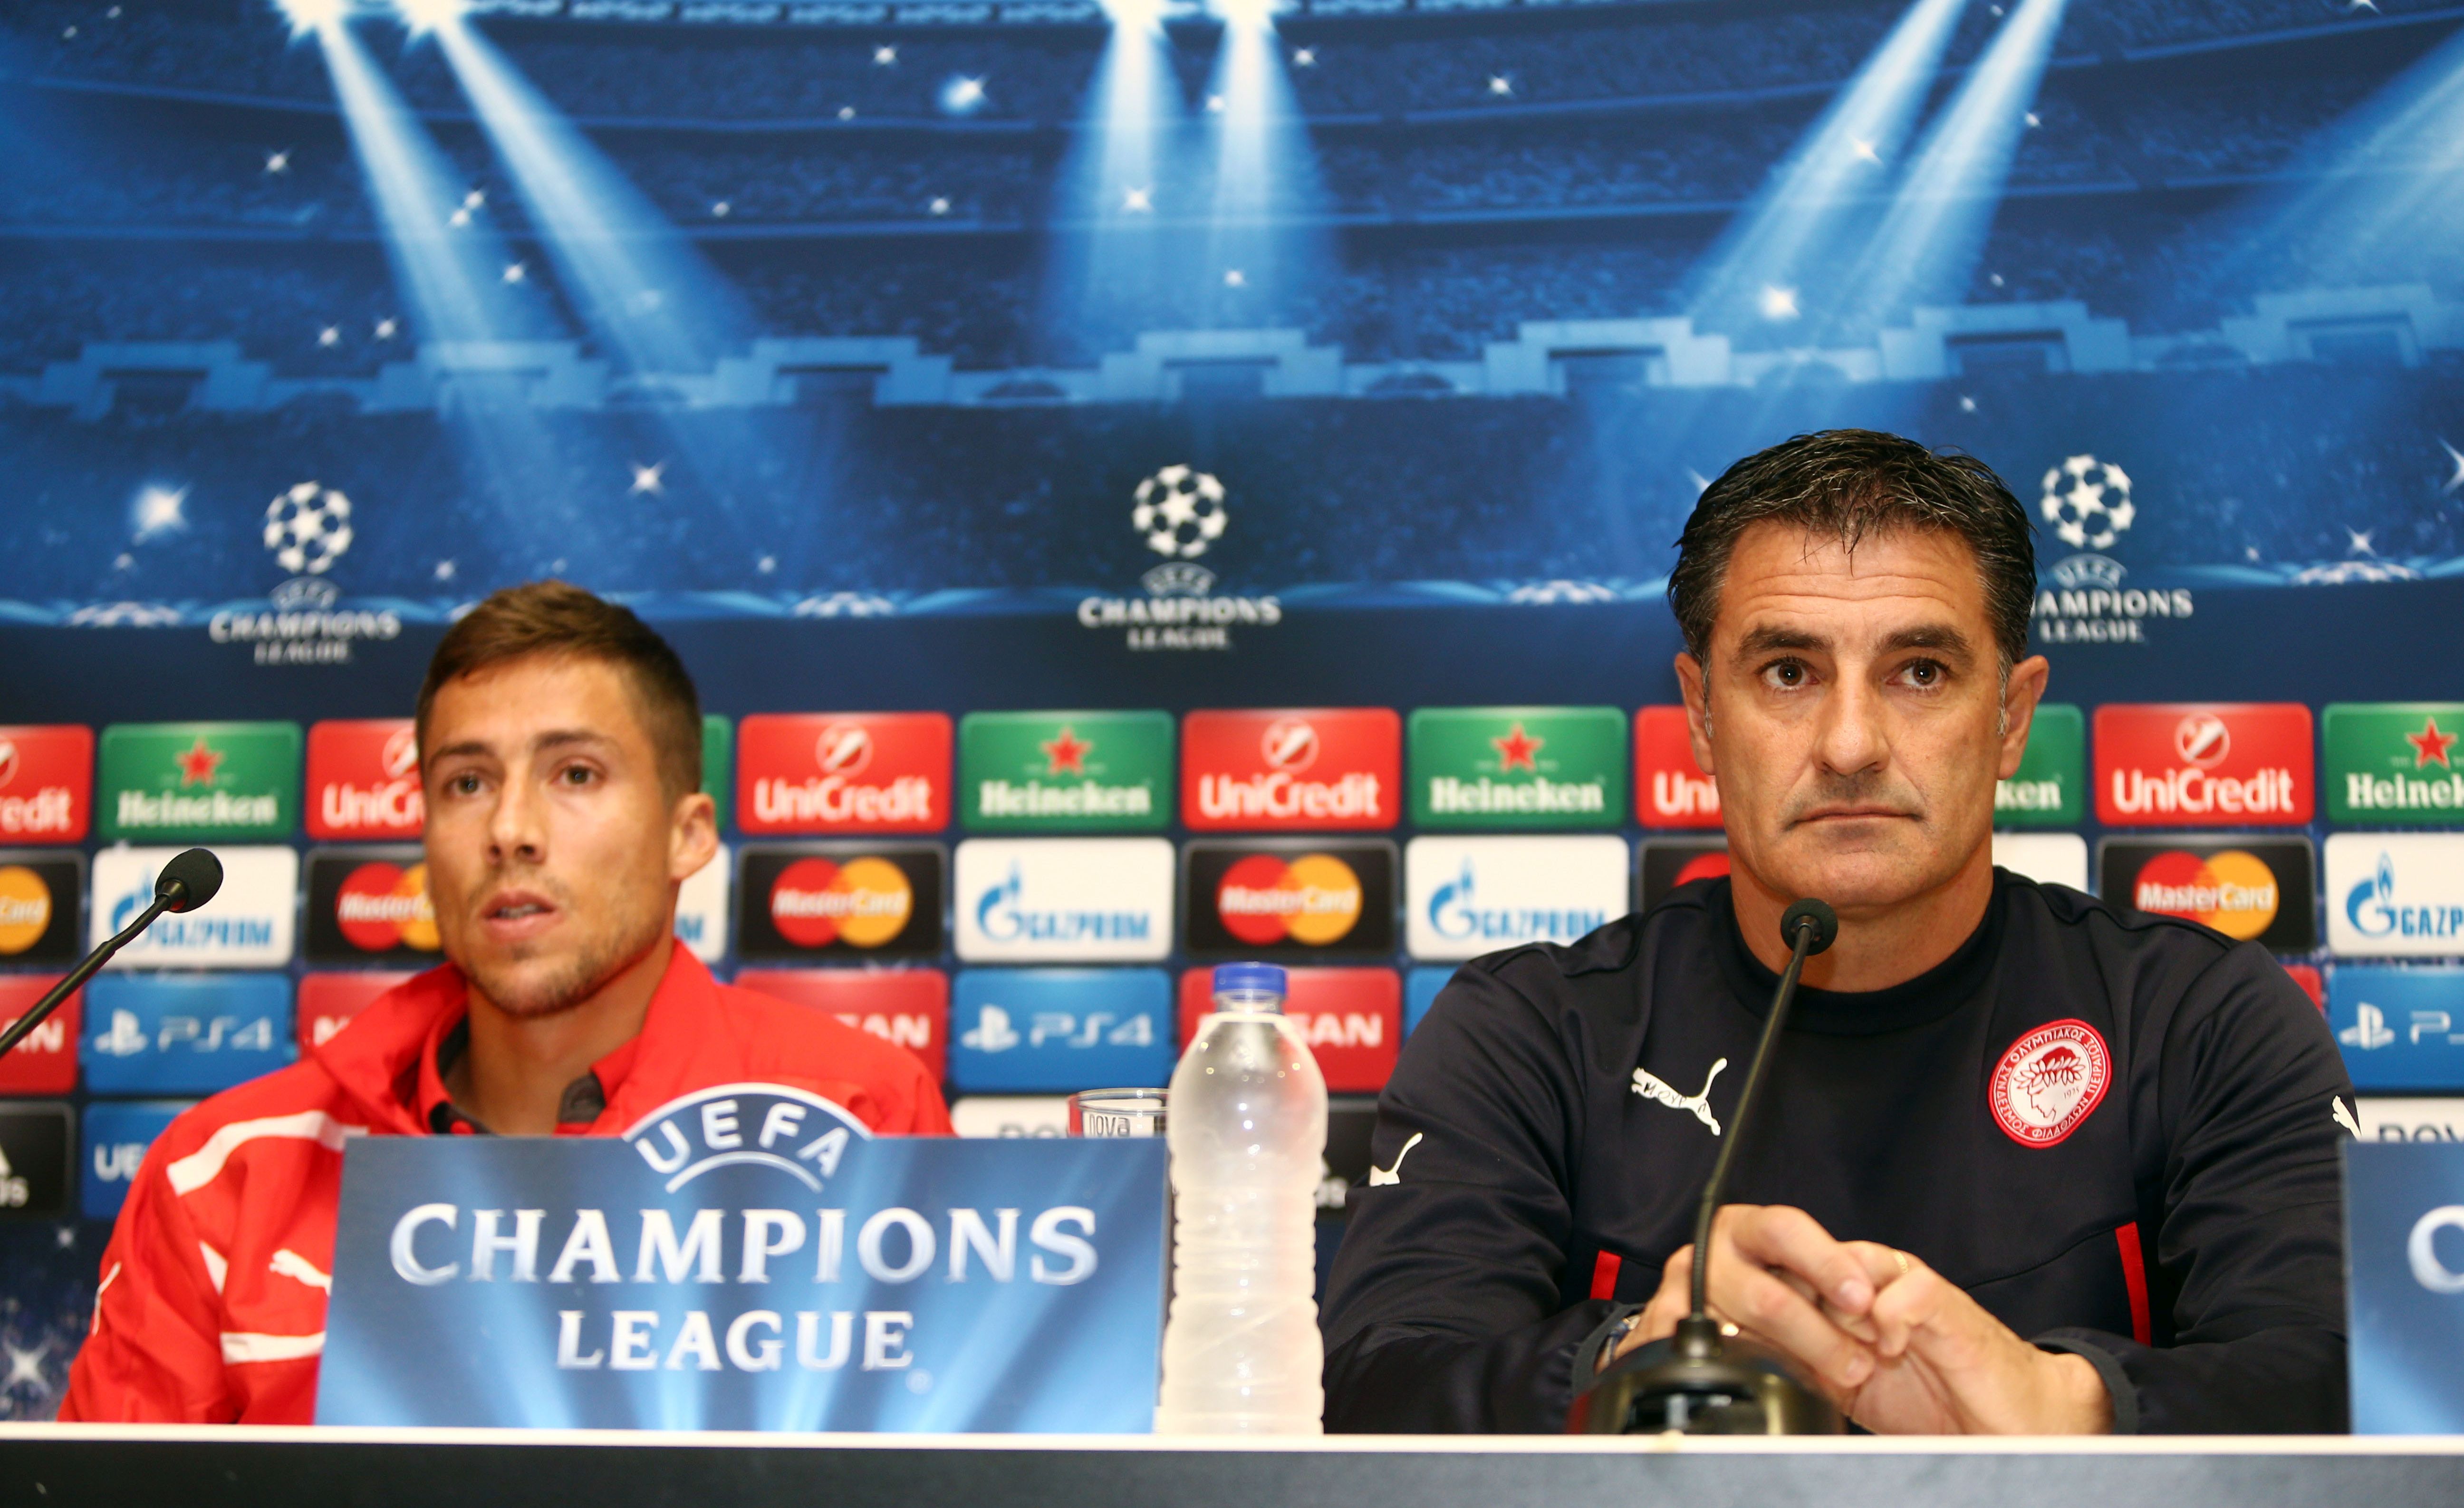 The press conference ahead of the match against Malmö